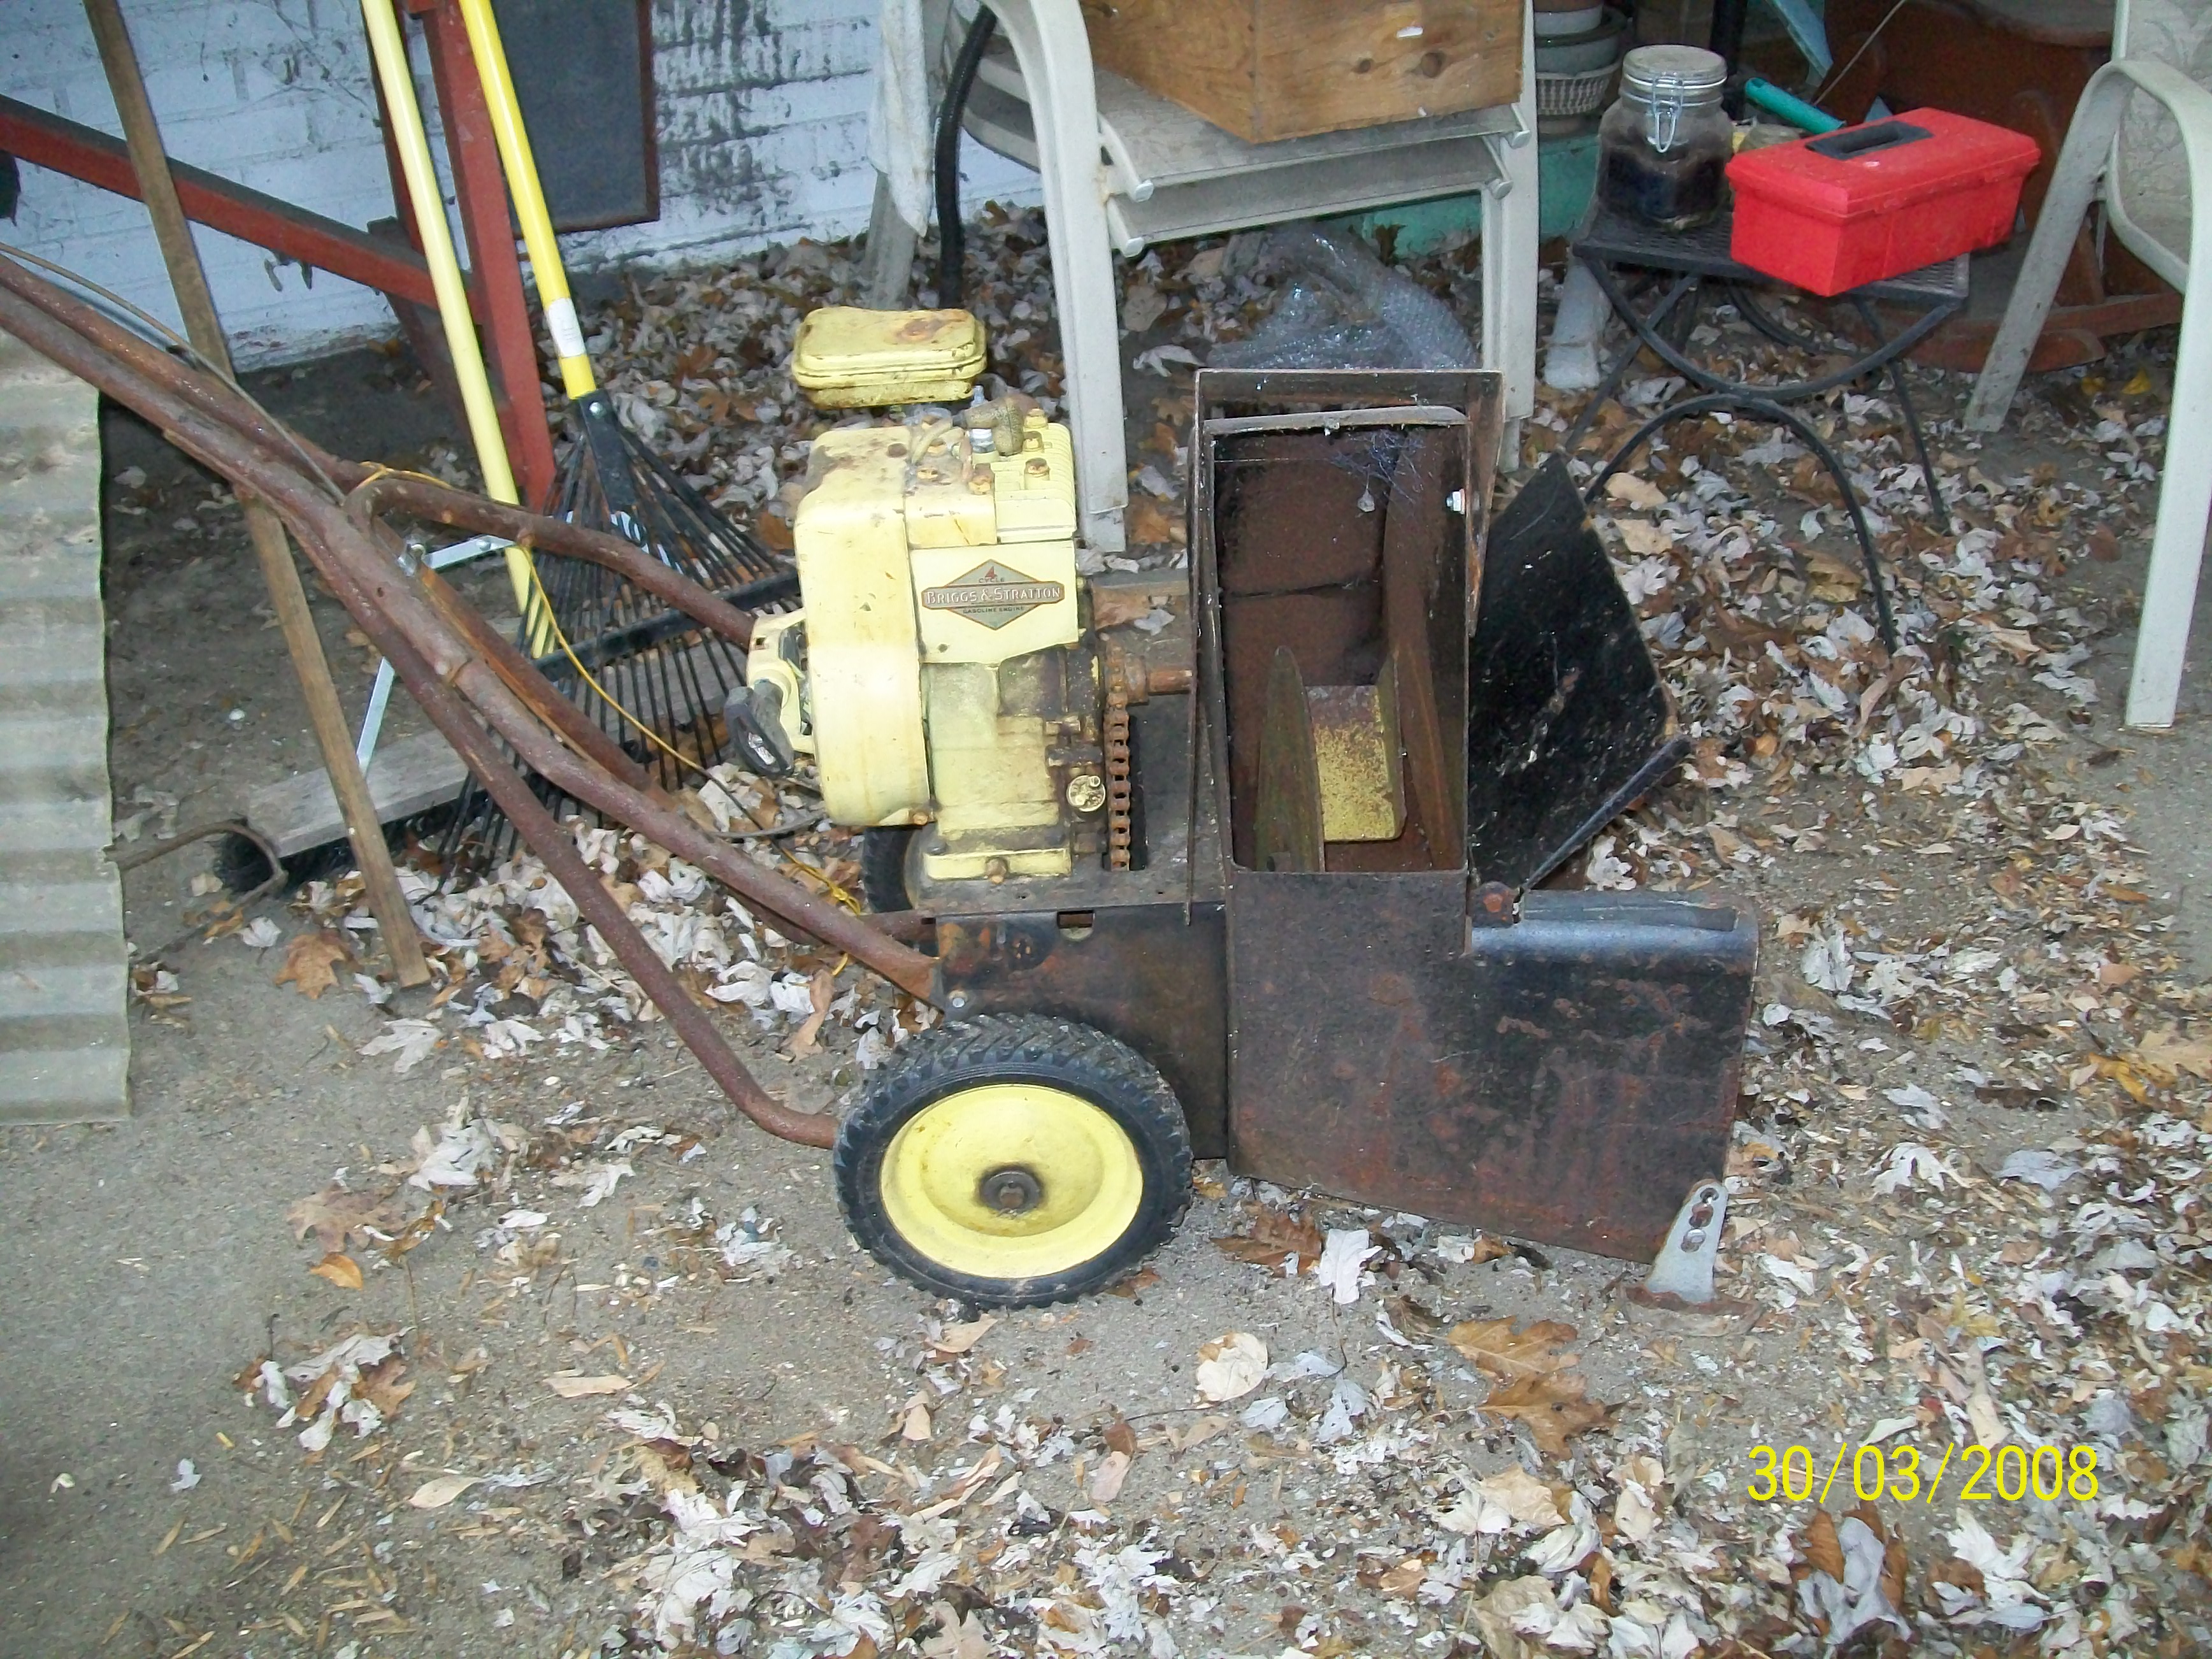 Antique 3 hp Power Equip "snow thrower 1 of 2 pics .JPG